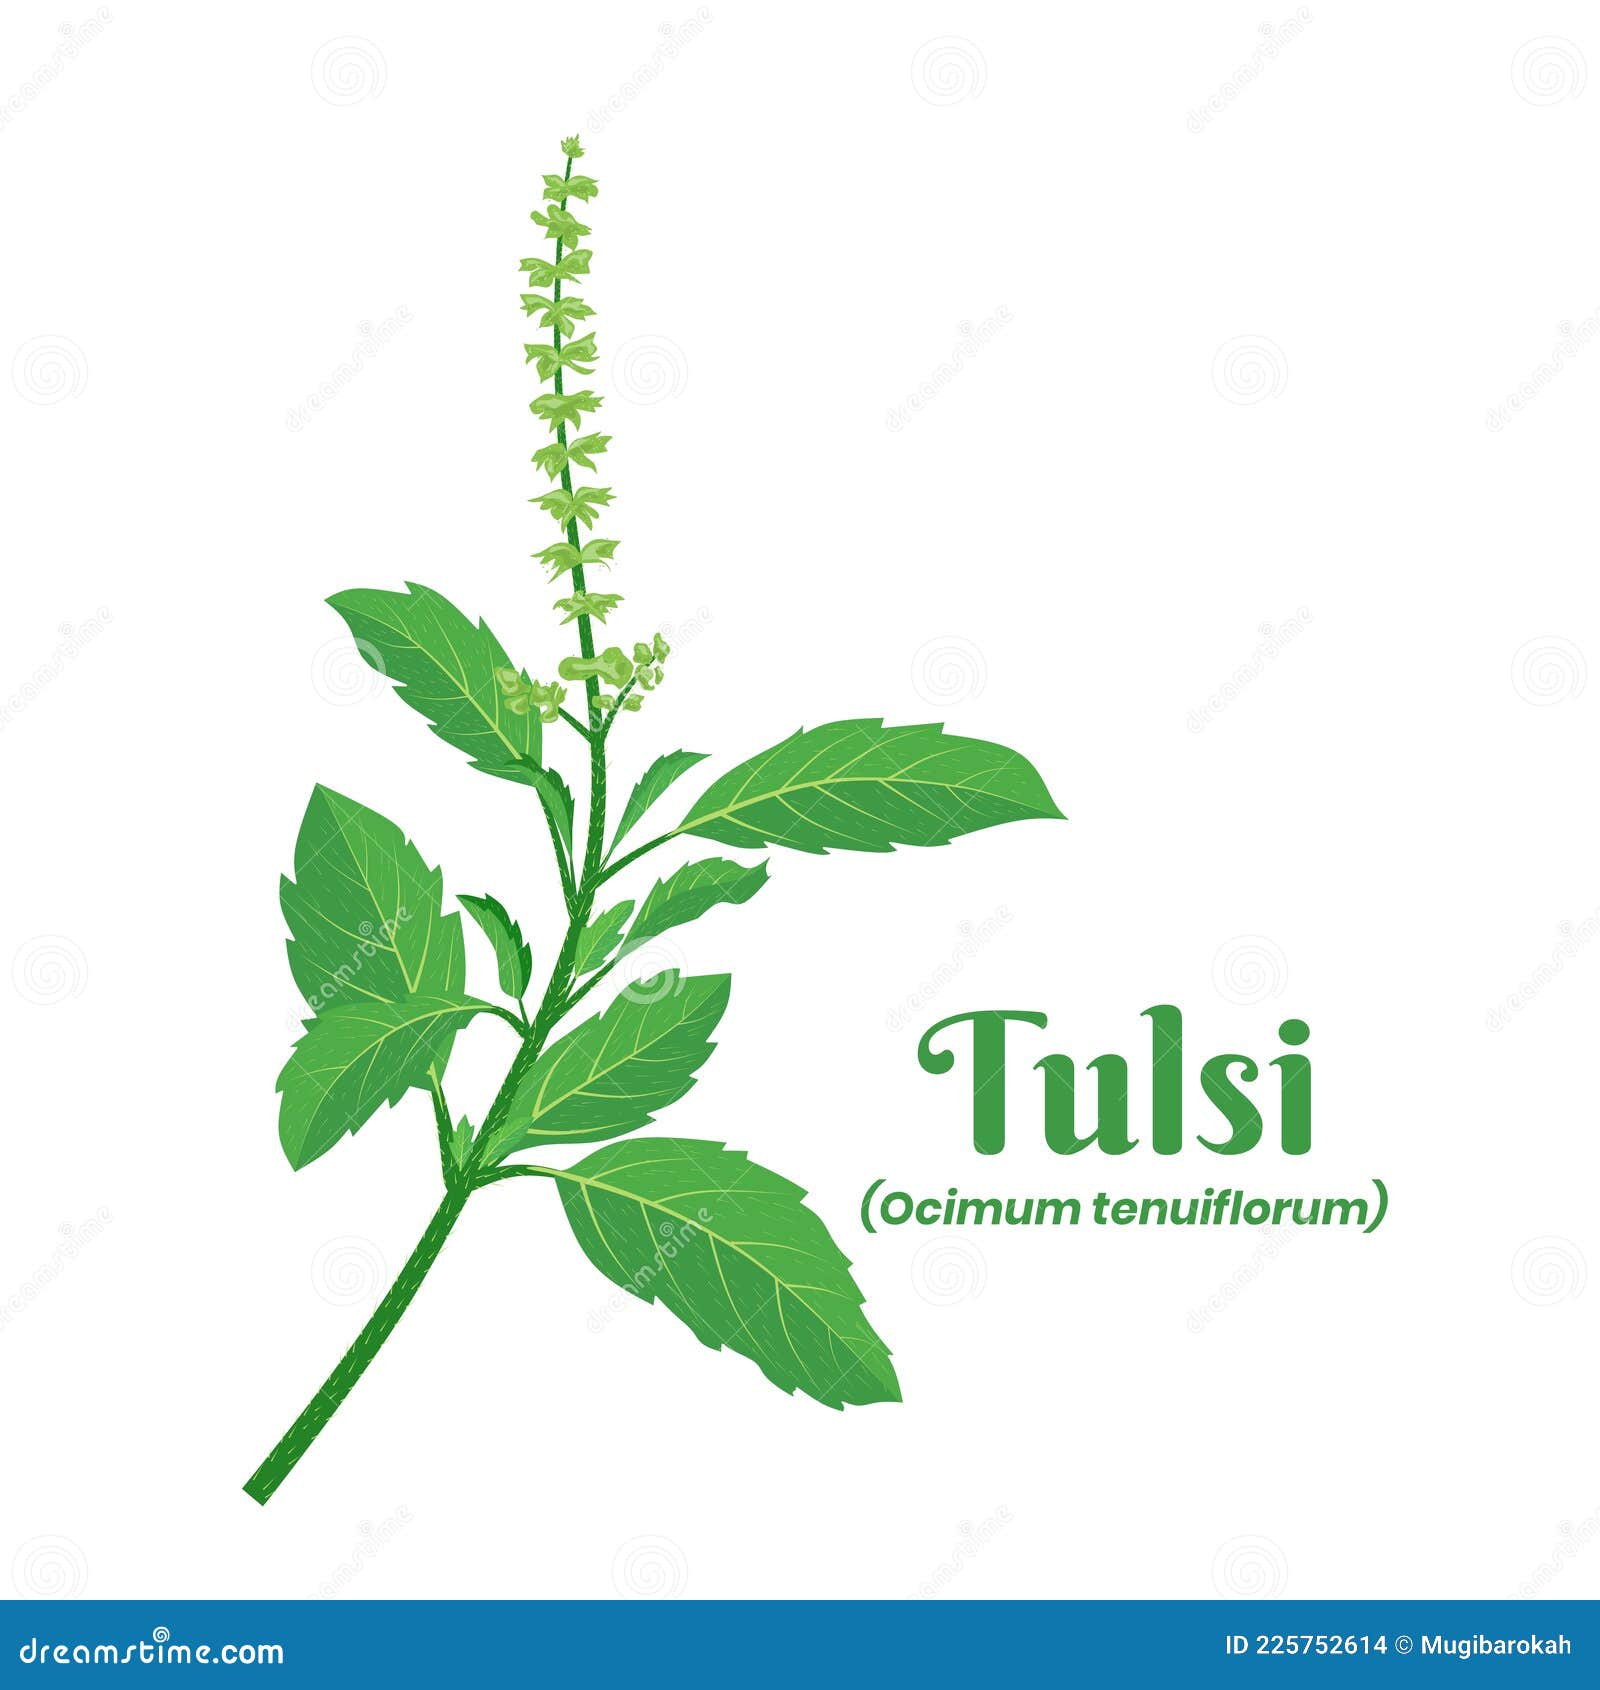 7 Reasons To Keep A Tulsi Plant In Your Home